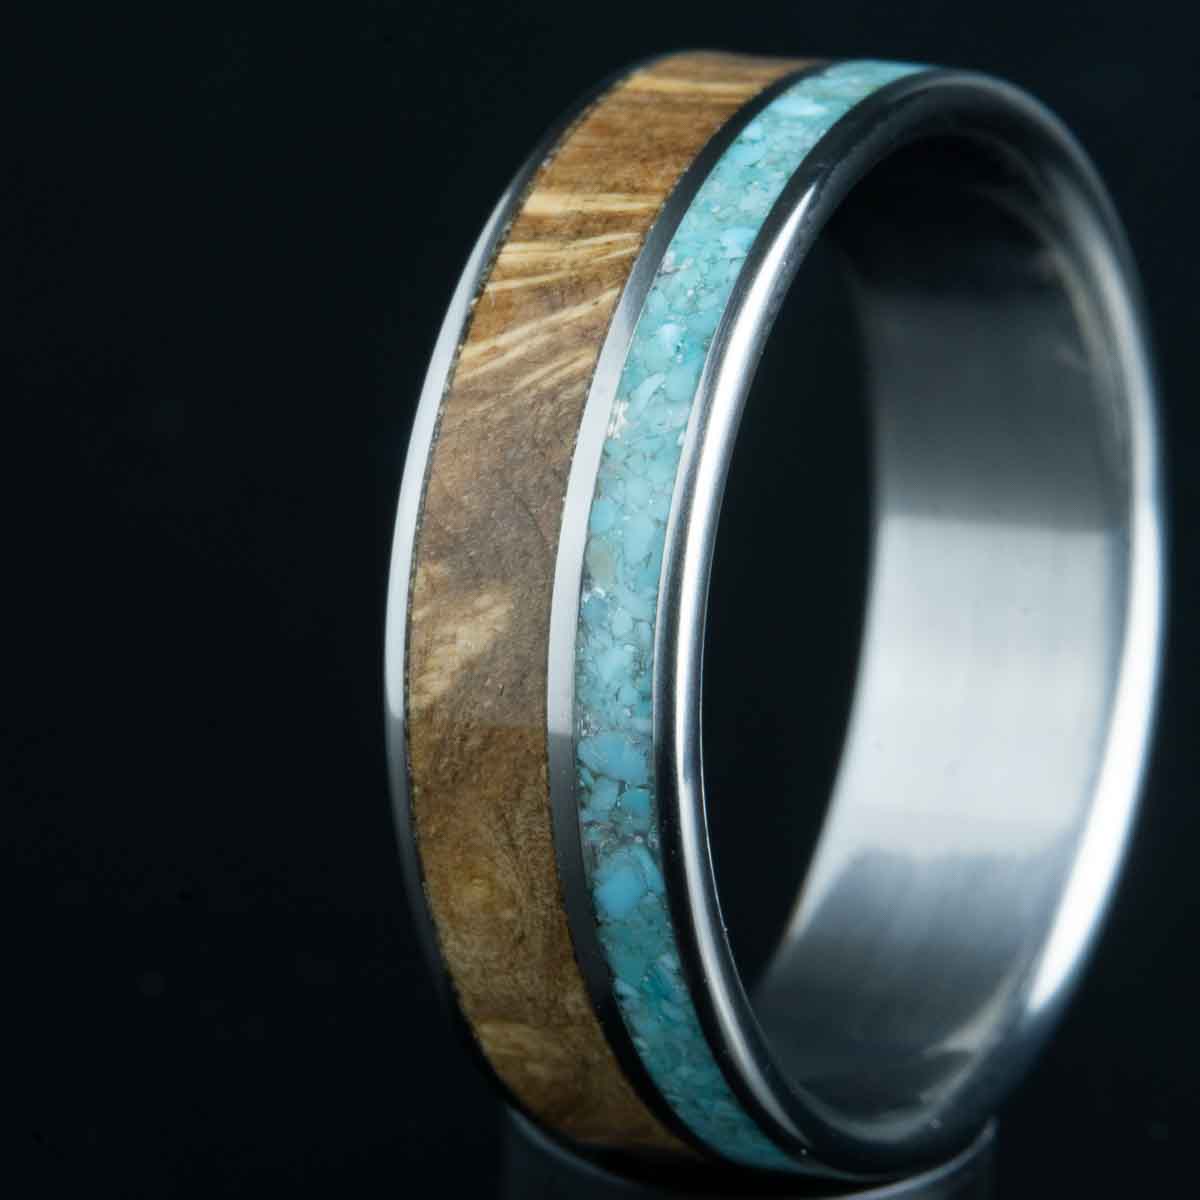 titanium ring with turquoise and burl oak wood by Peacefield titanium